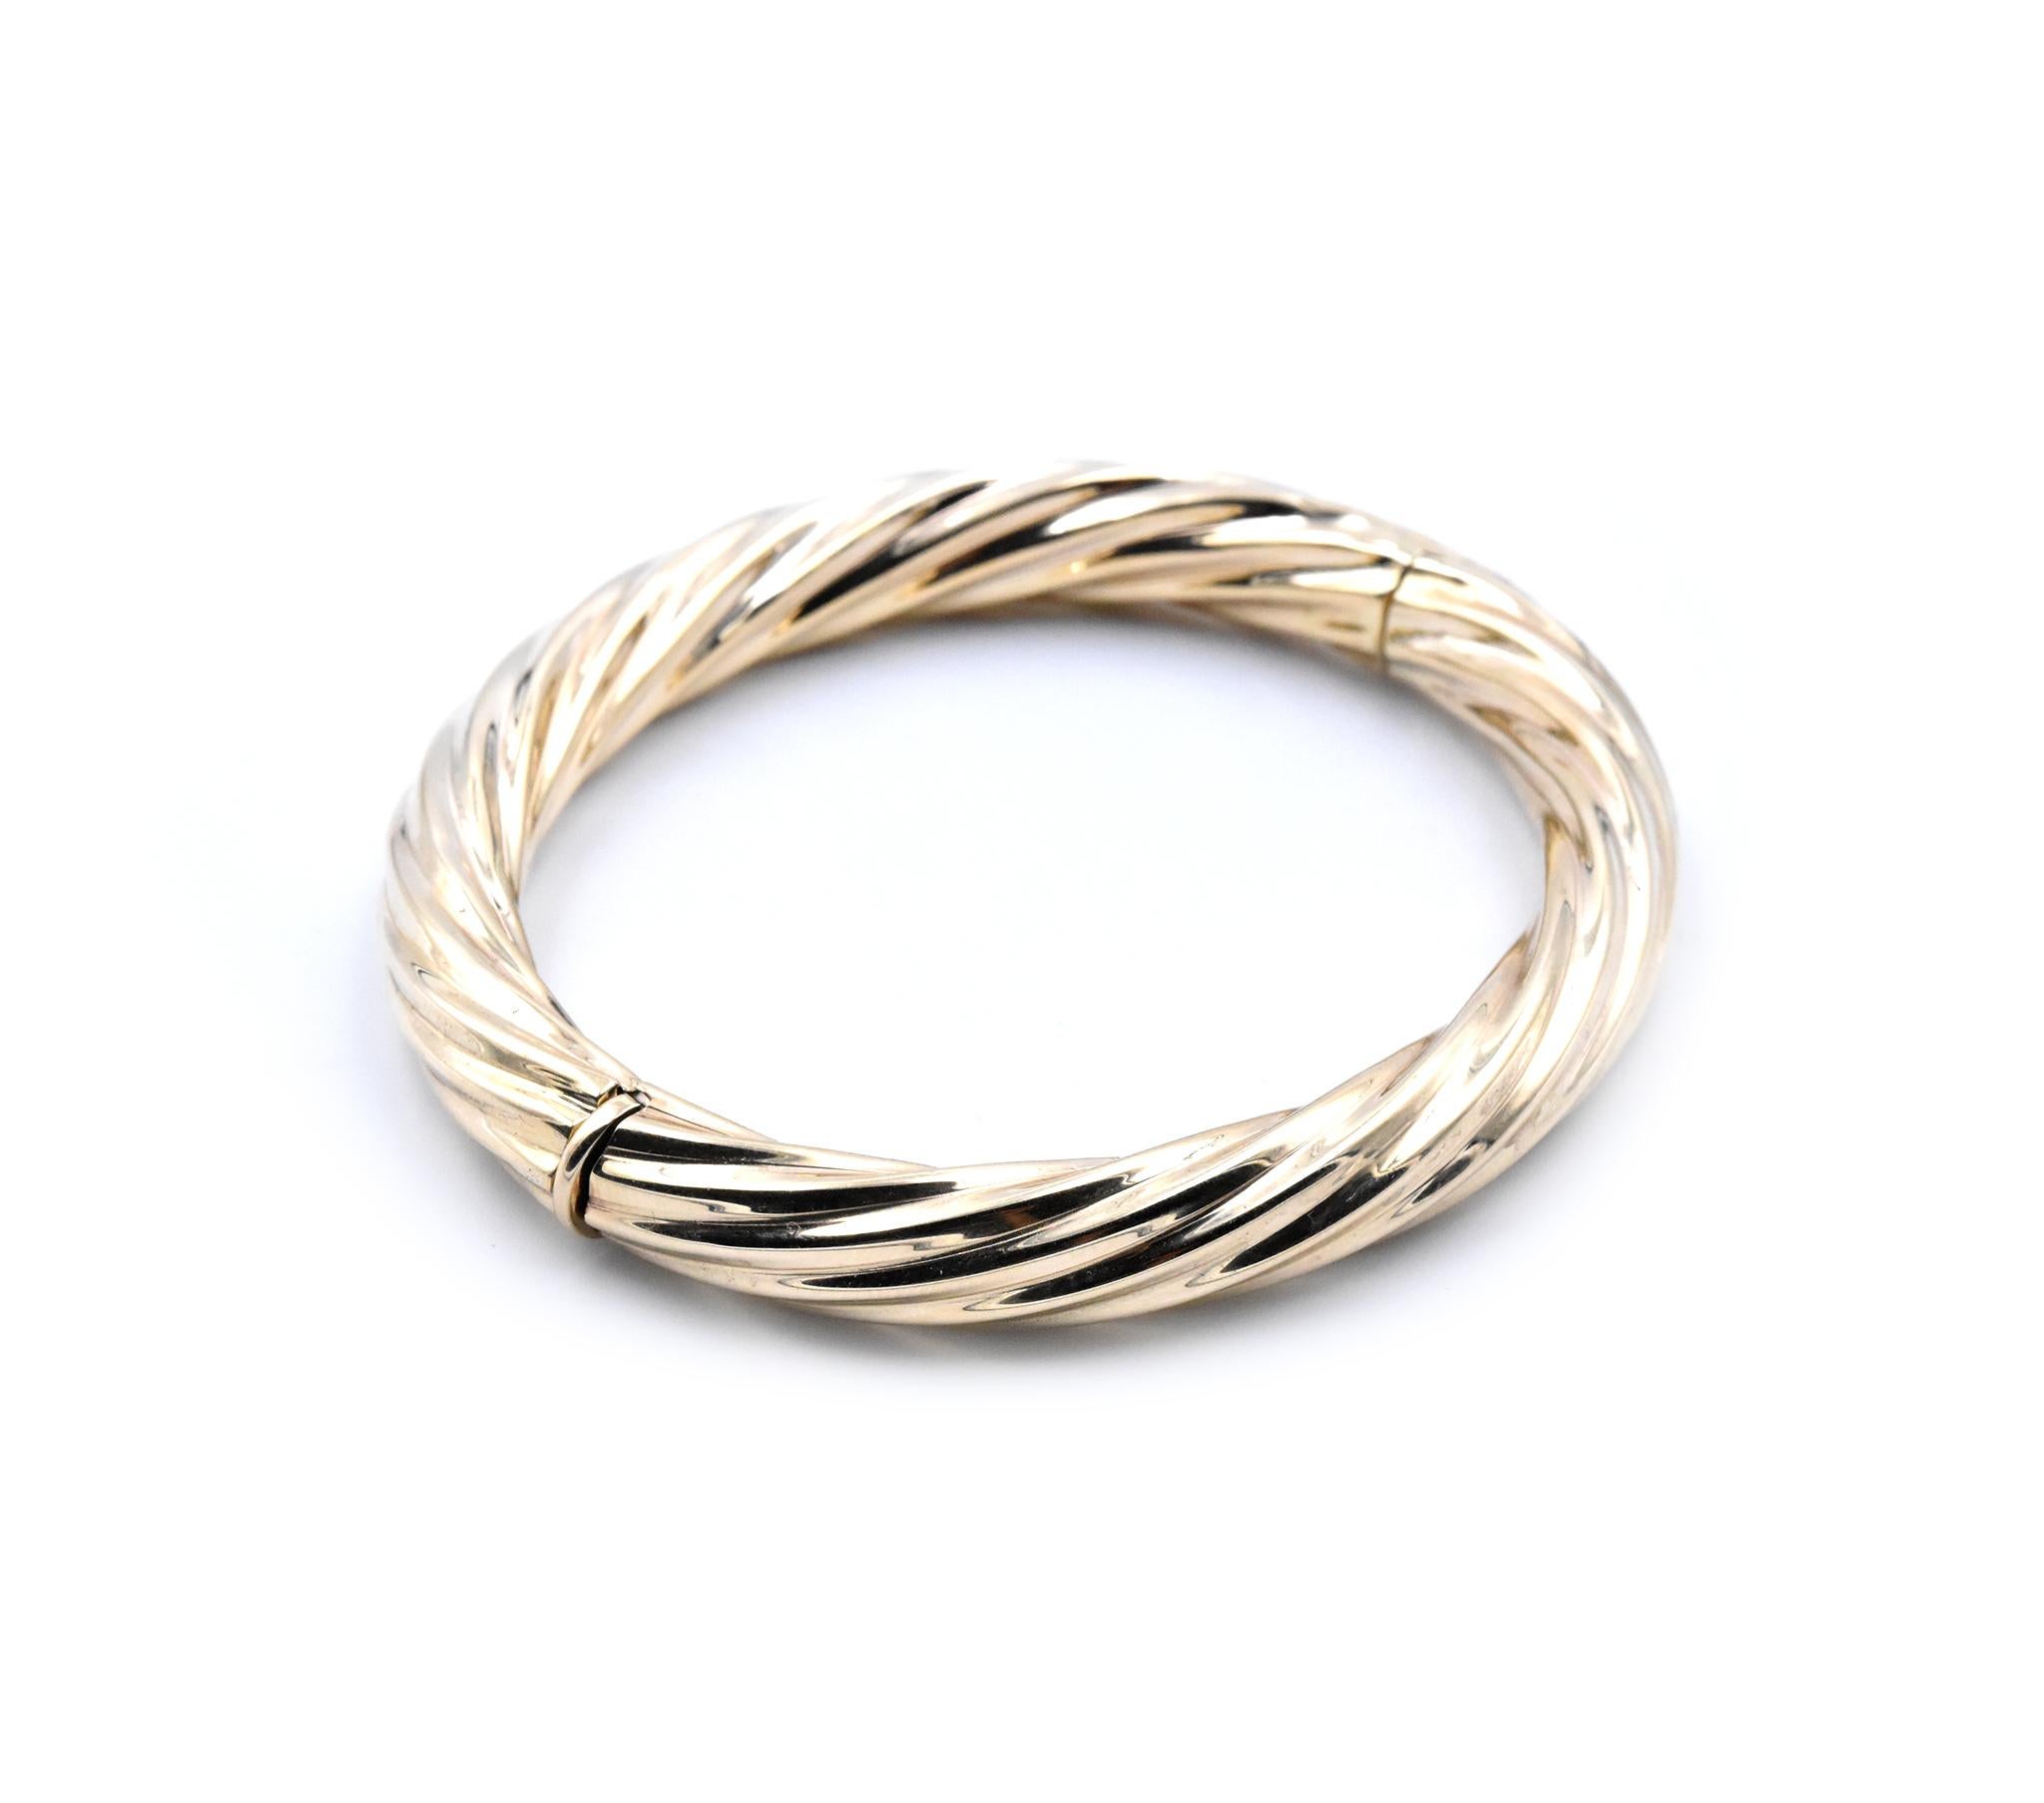 Material: 14k yellow gold
Dimensions: bracelet measures 7-inches in length
Weight: 14.69 grams
